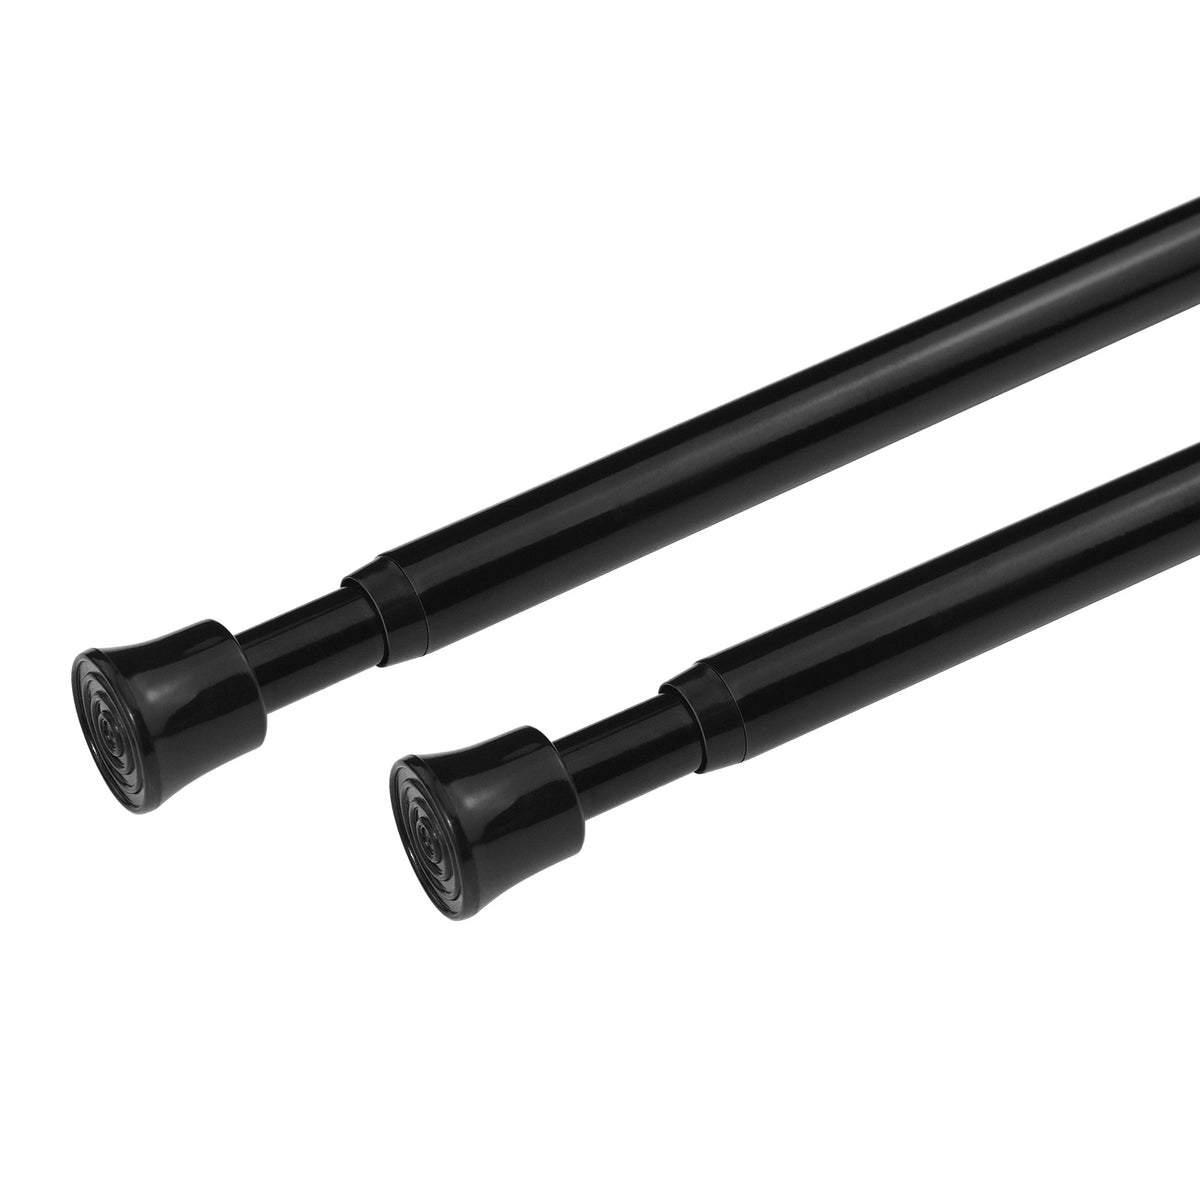 Black Spring Tension Curtain Rods 3 Sizes